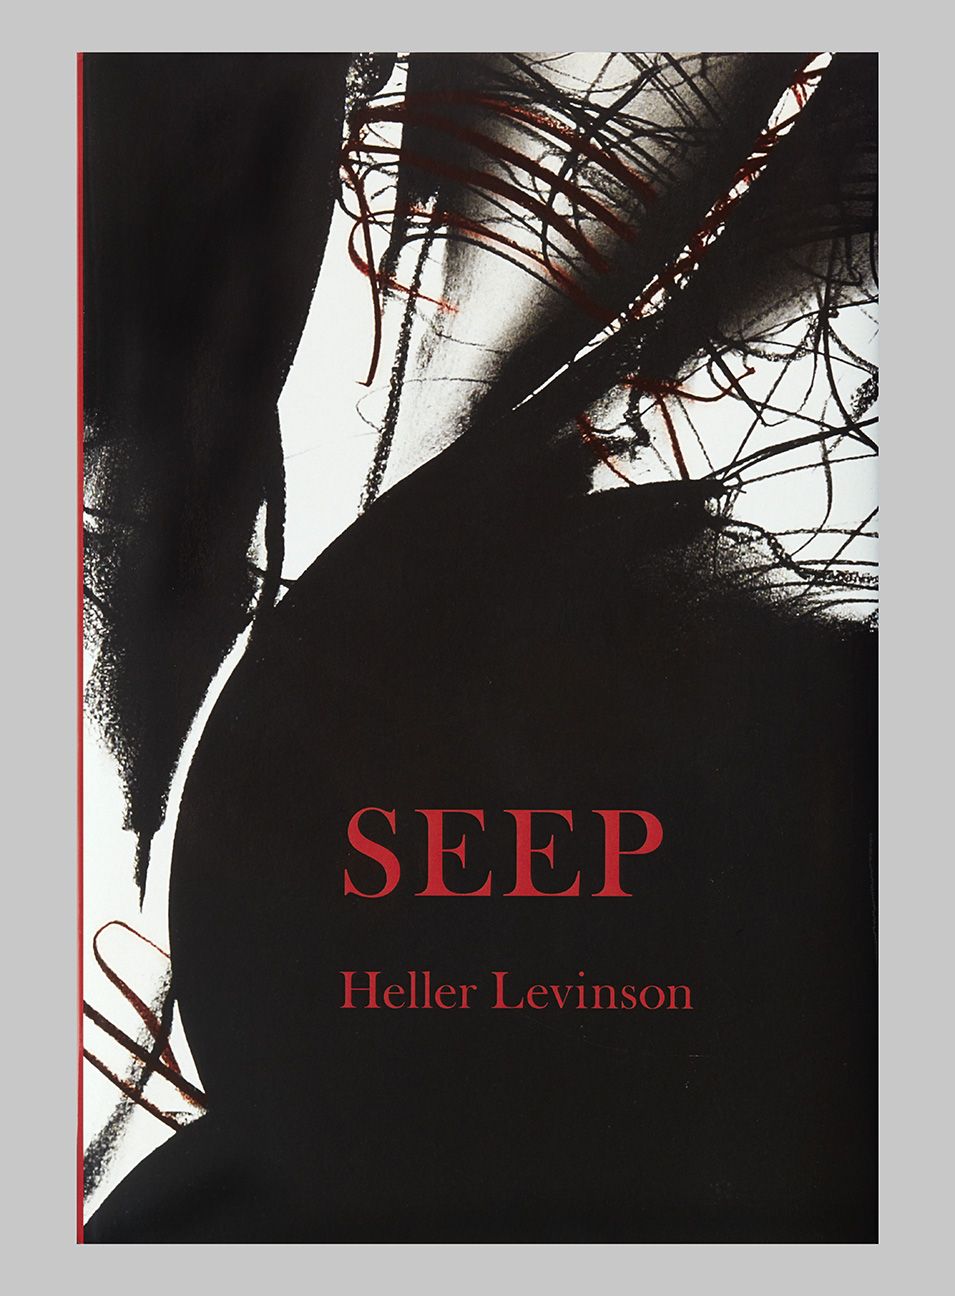 Seep, Poems by Heller Levinson, cover art and design by Linda Lynch, 2020, Black Widow Press